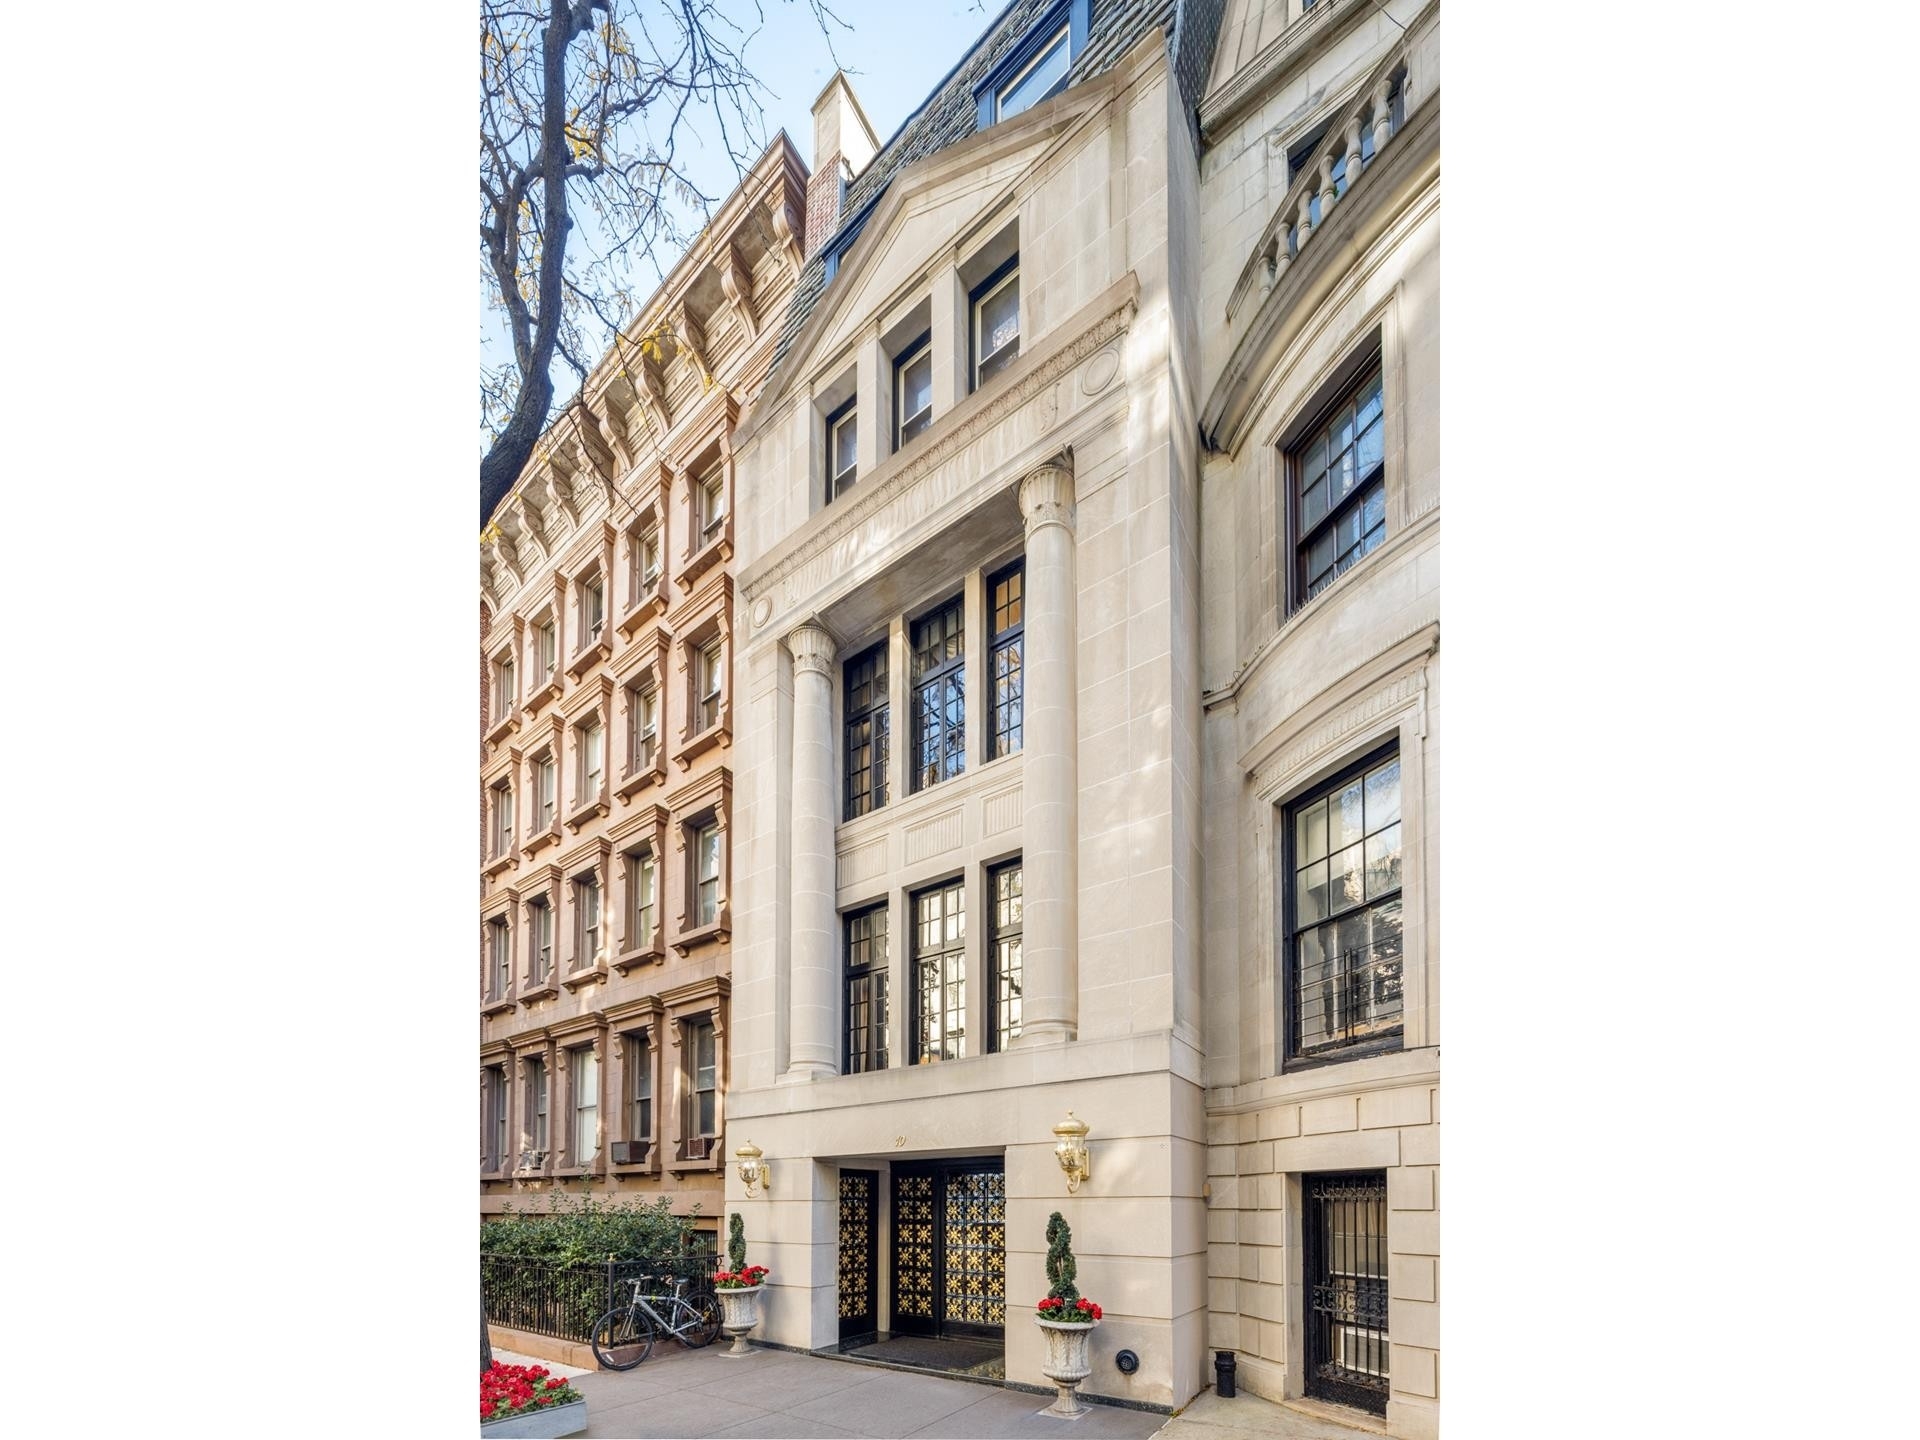 2. Single Family Townhouse for Sale at 10 E 64TH ST, TOWNHOUSE Lenox Hill, New York, NY 10065